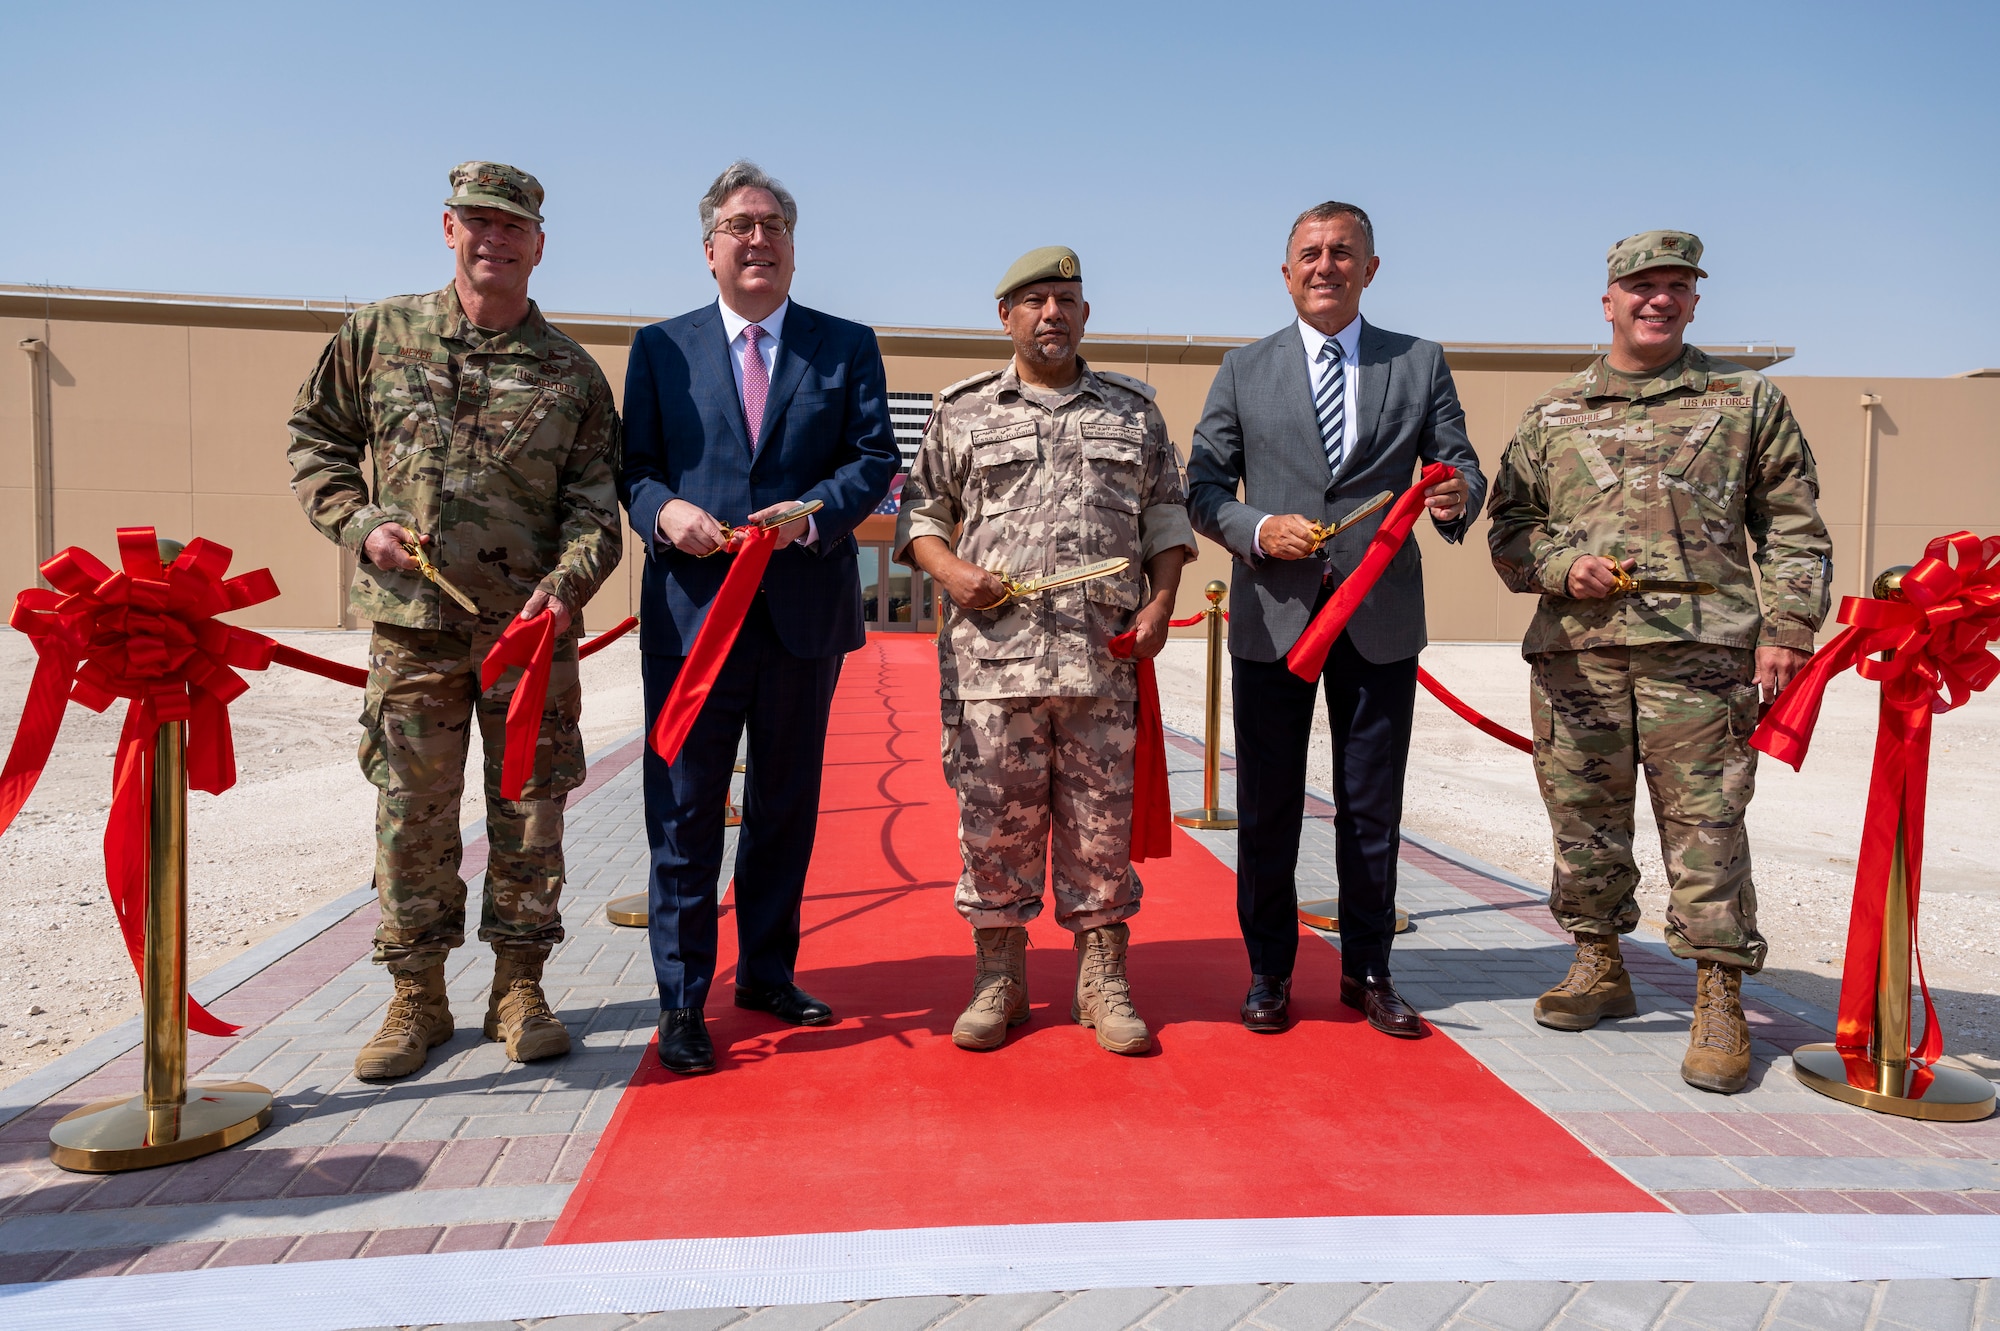 Distinguished guests from the U.S. Embassy in Qatar, Qatar Emiri Corps of Engineers, U.S. Air Forces Central and Bahadir Construction Engineering Contracting and Trading Company cut the ribbon outside the new Blatchford-Preston Complex dormitory Aug. 3, 2021, at Al Udeid Air Base, Qatar.